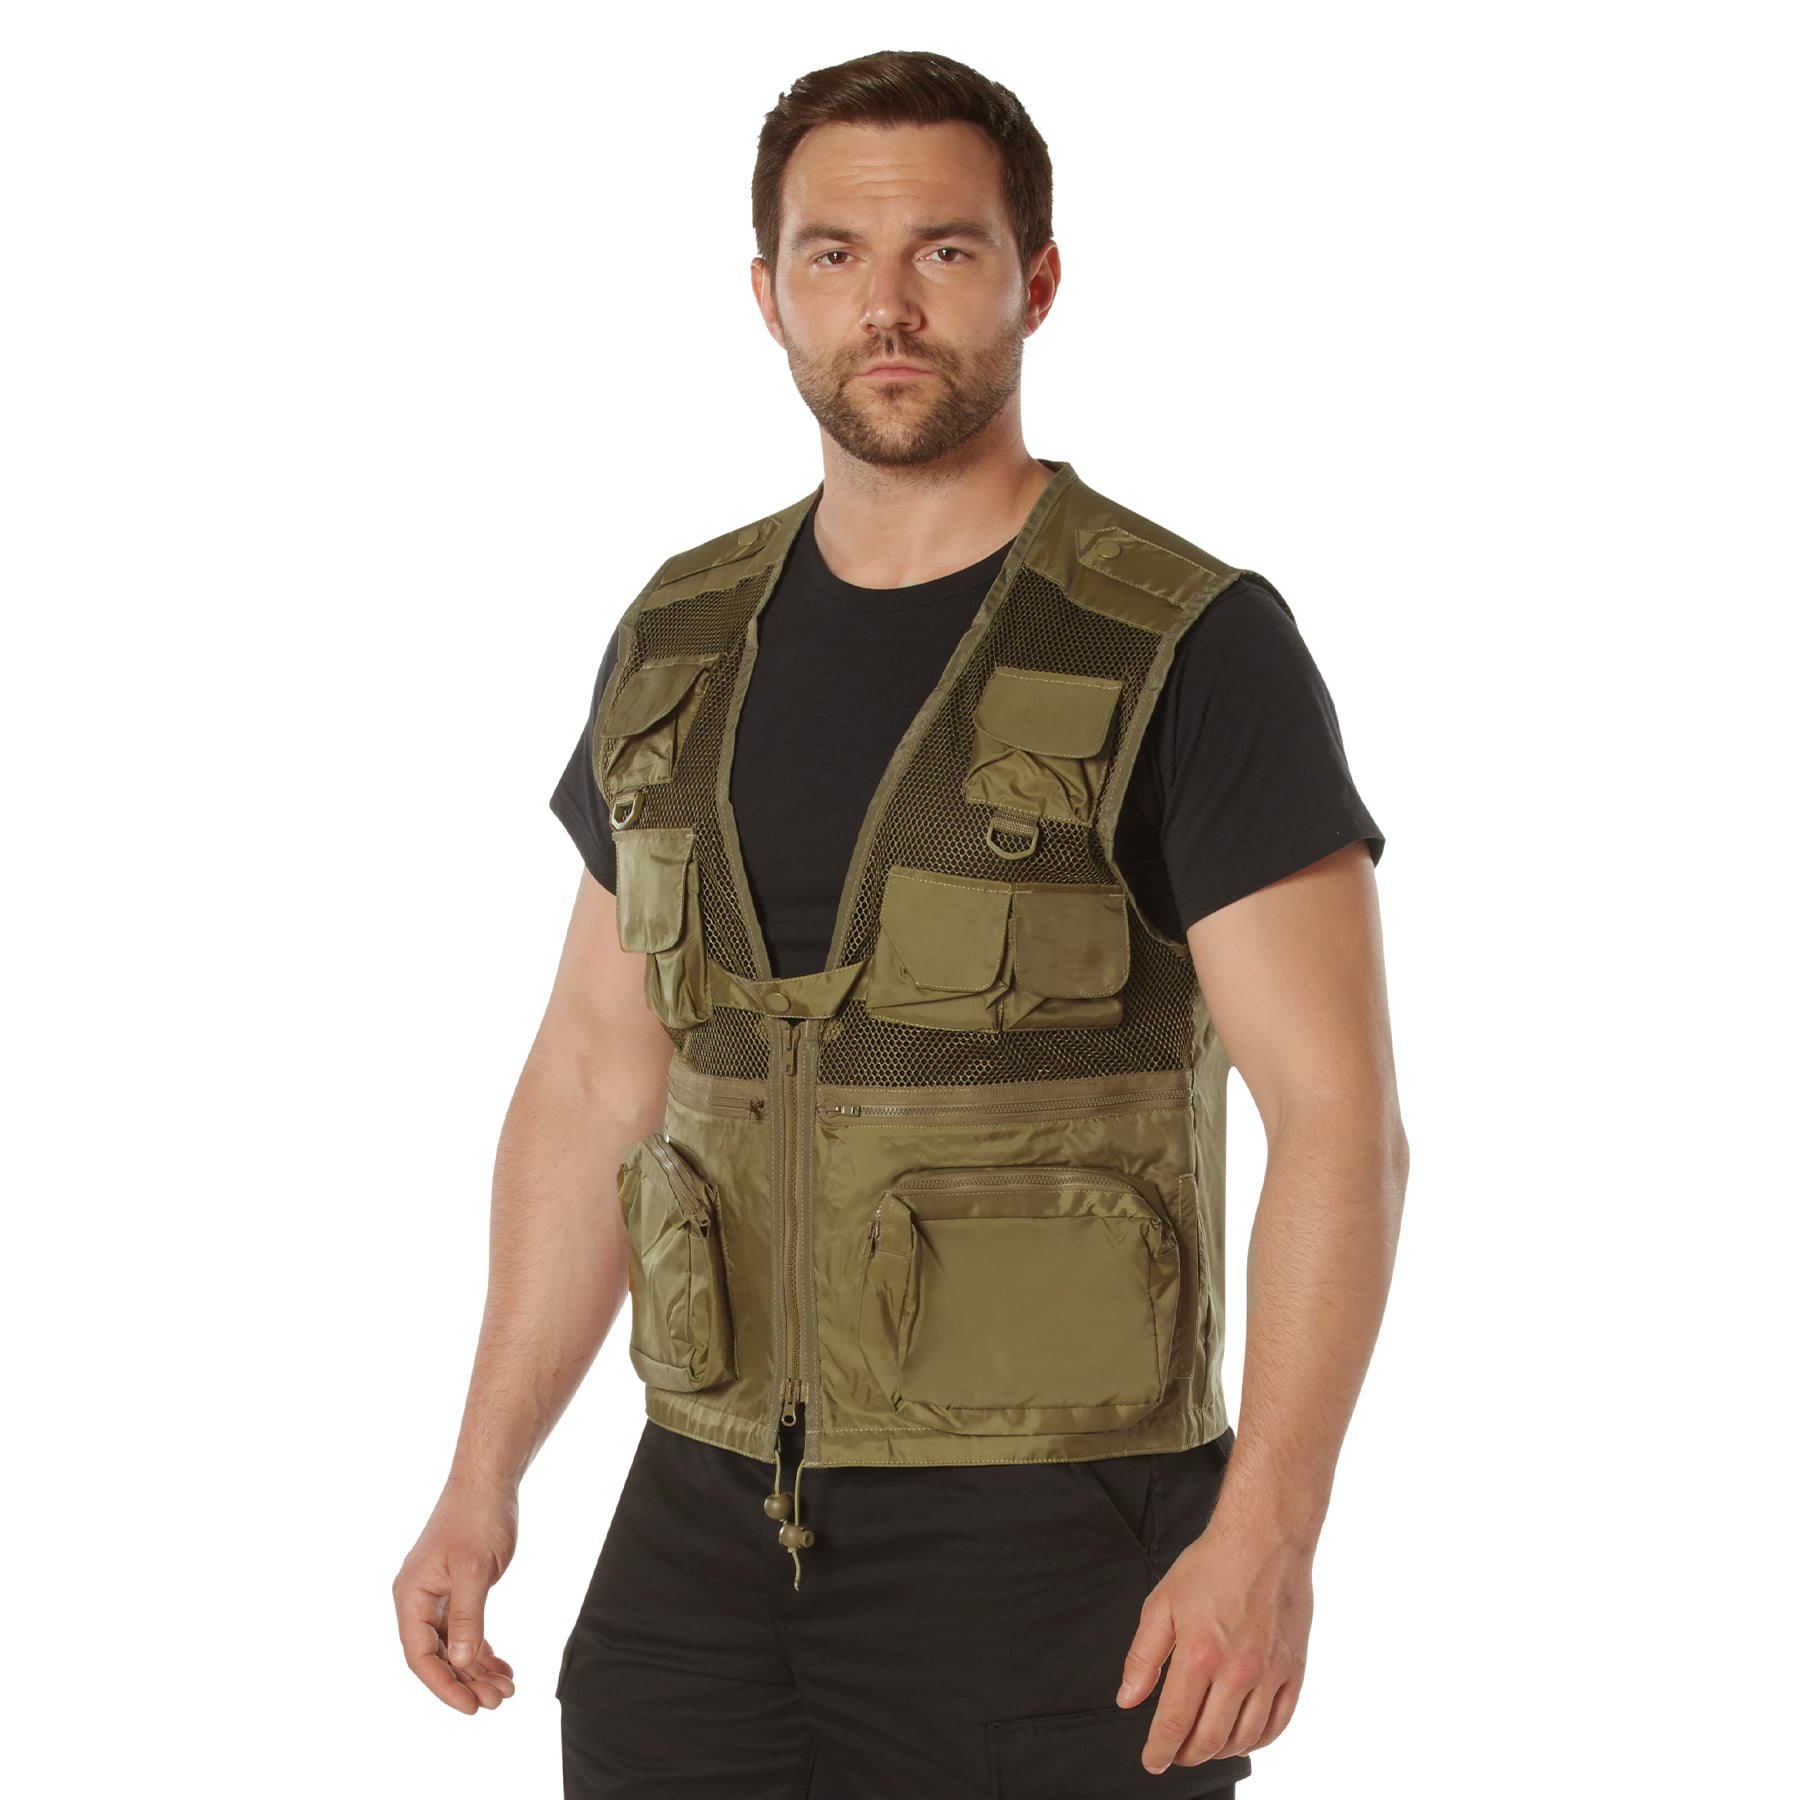 RECON Tactical Vest BROWN ROTHCO 8647 L-11